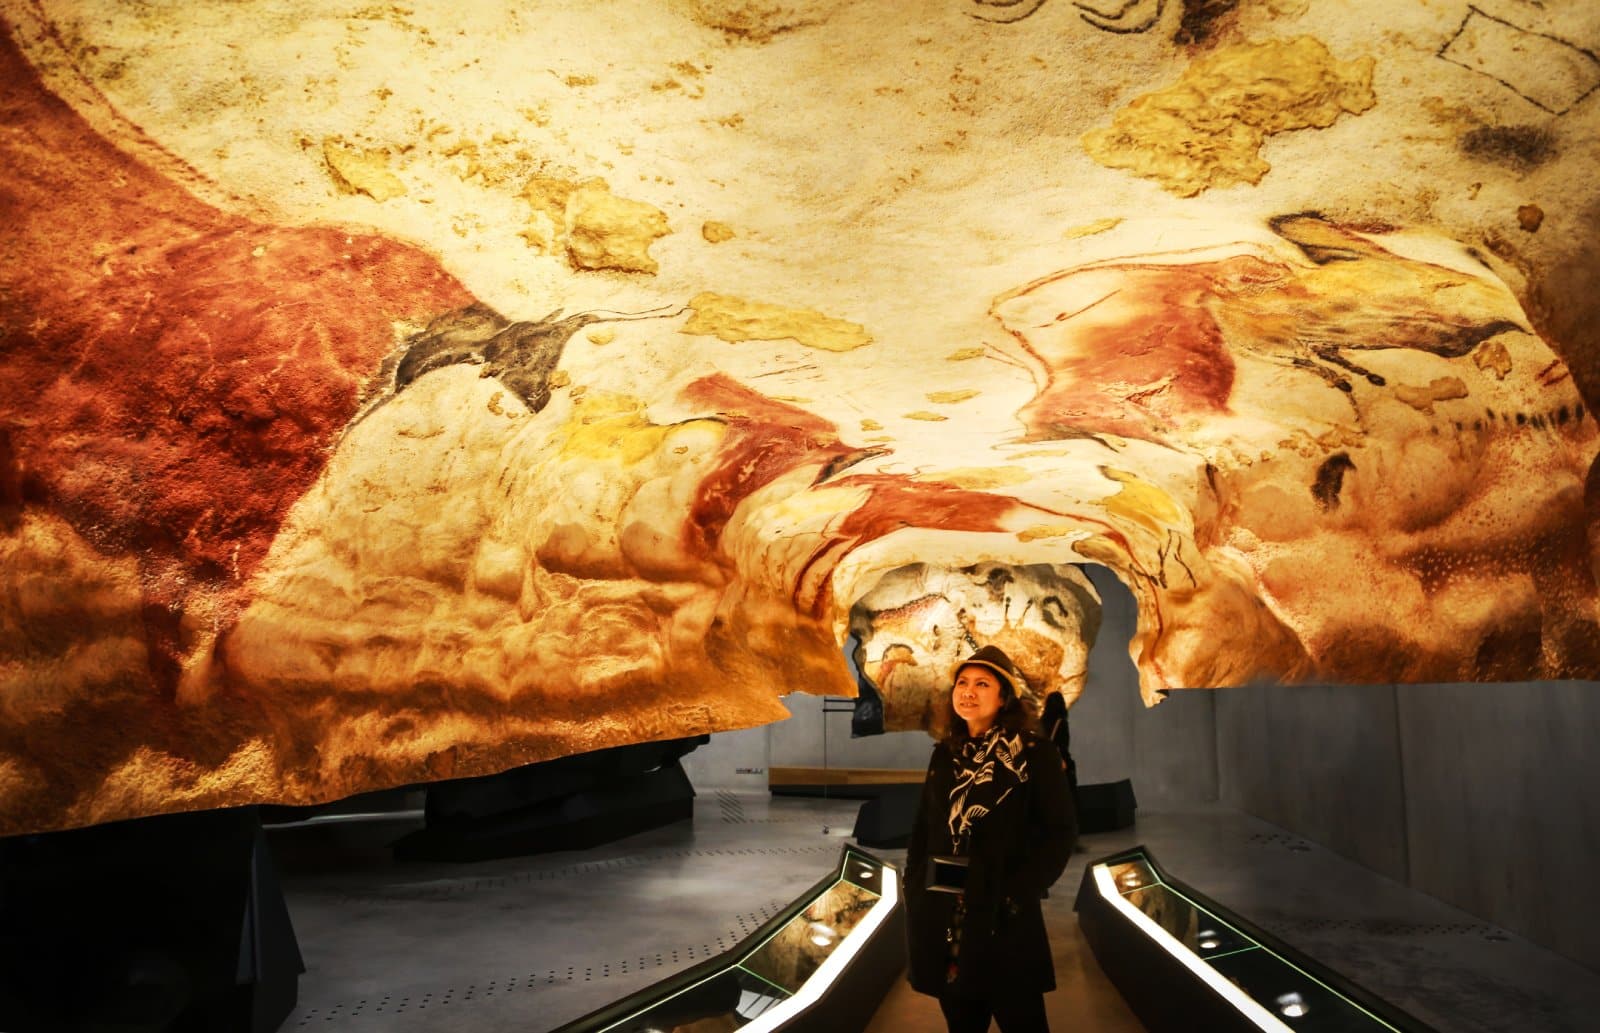 Image Credit: Shutterstock / thipjang <p><span>Lascaux Caves, France: The Lascaux Caves house ancient cave paintings that date back over 17,000 years. To protect these prehistoric masterpieces from damage, the caves have been closed to the public since 1963.</span></p>